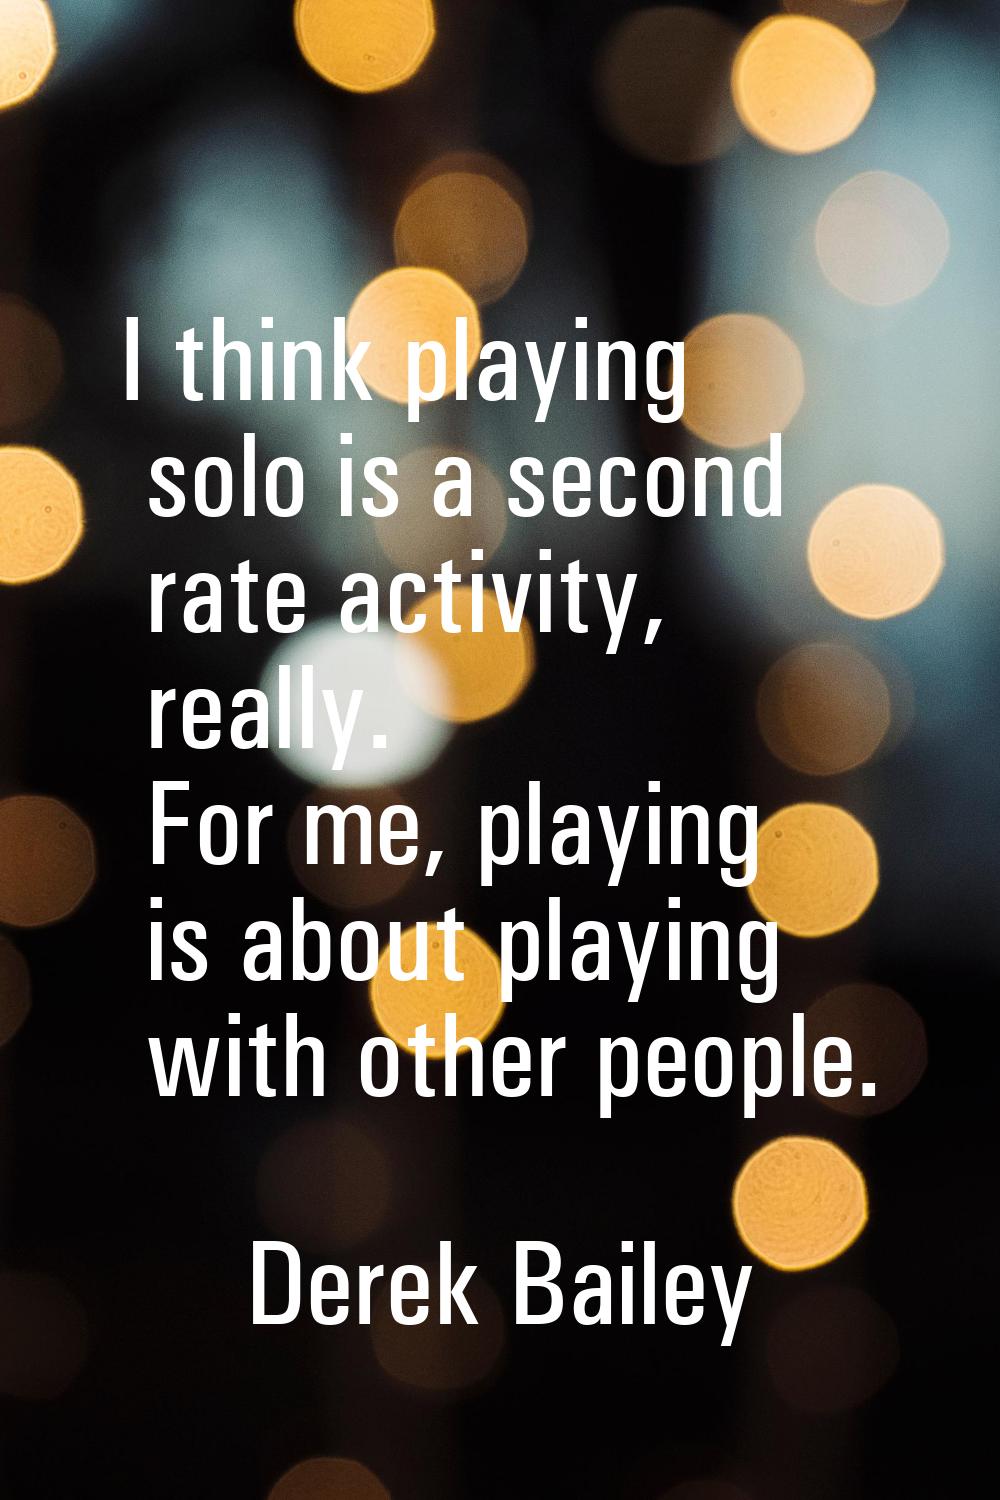 I think playing solo is a second rate activity, really. For me, playing is about playing with other